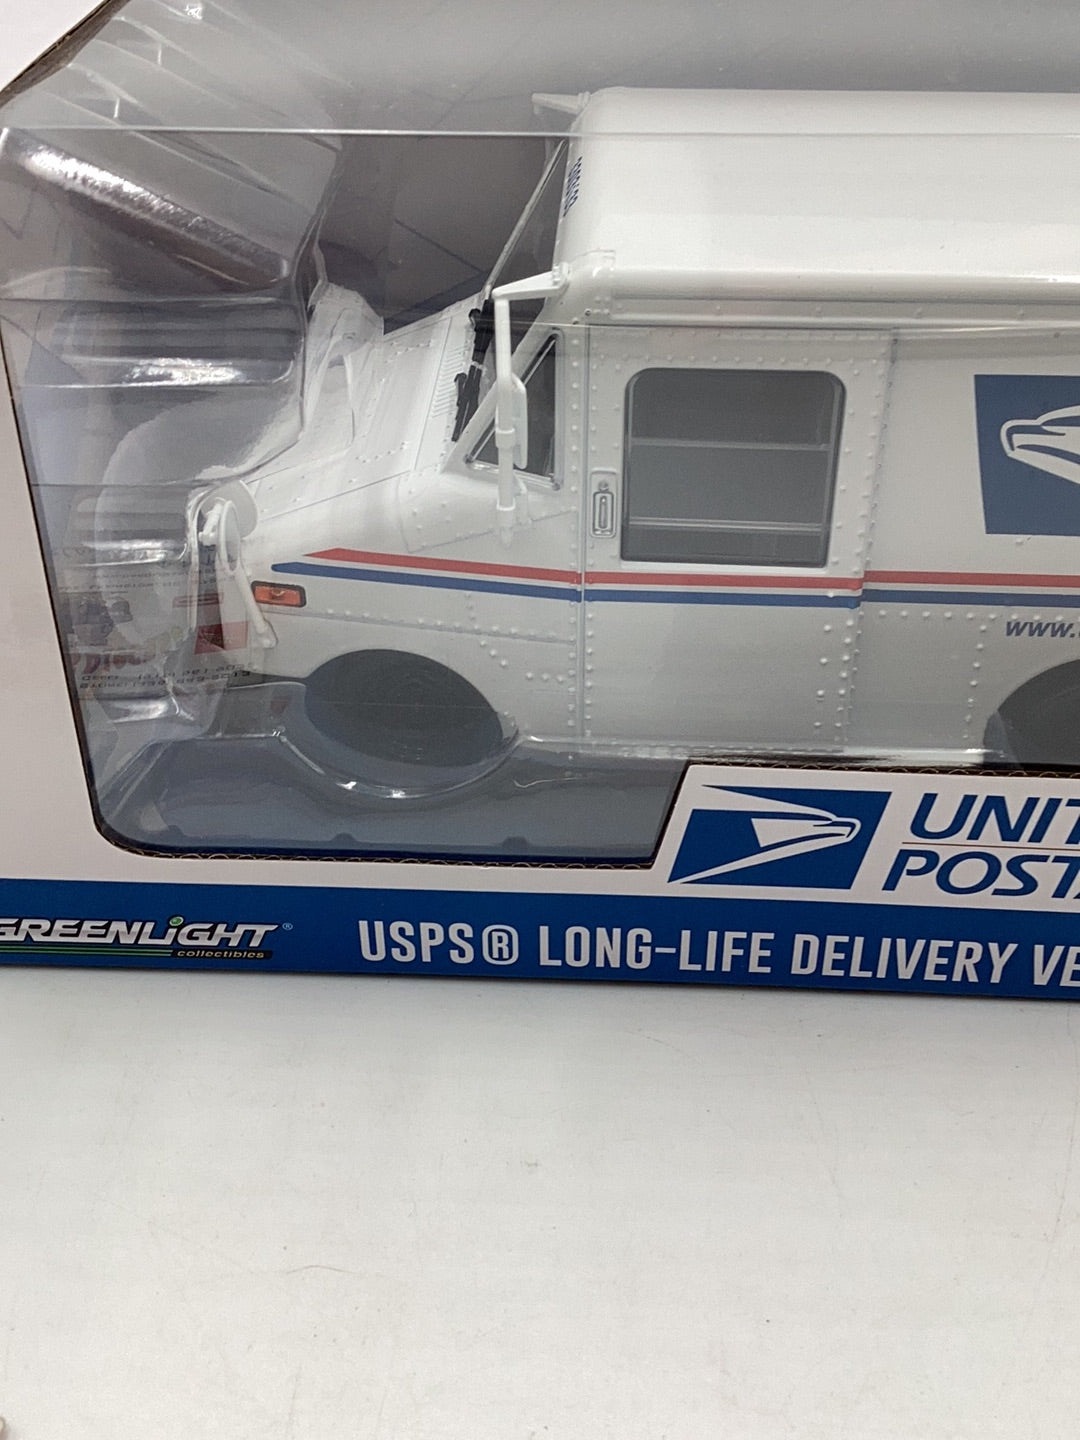 Greenlight 1/24 USPS Long Life Delivery Vehicle United States Postal Service MiJo Exclusives